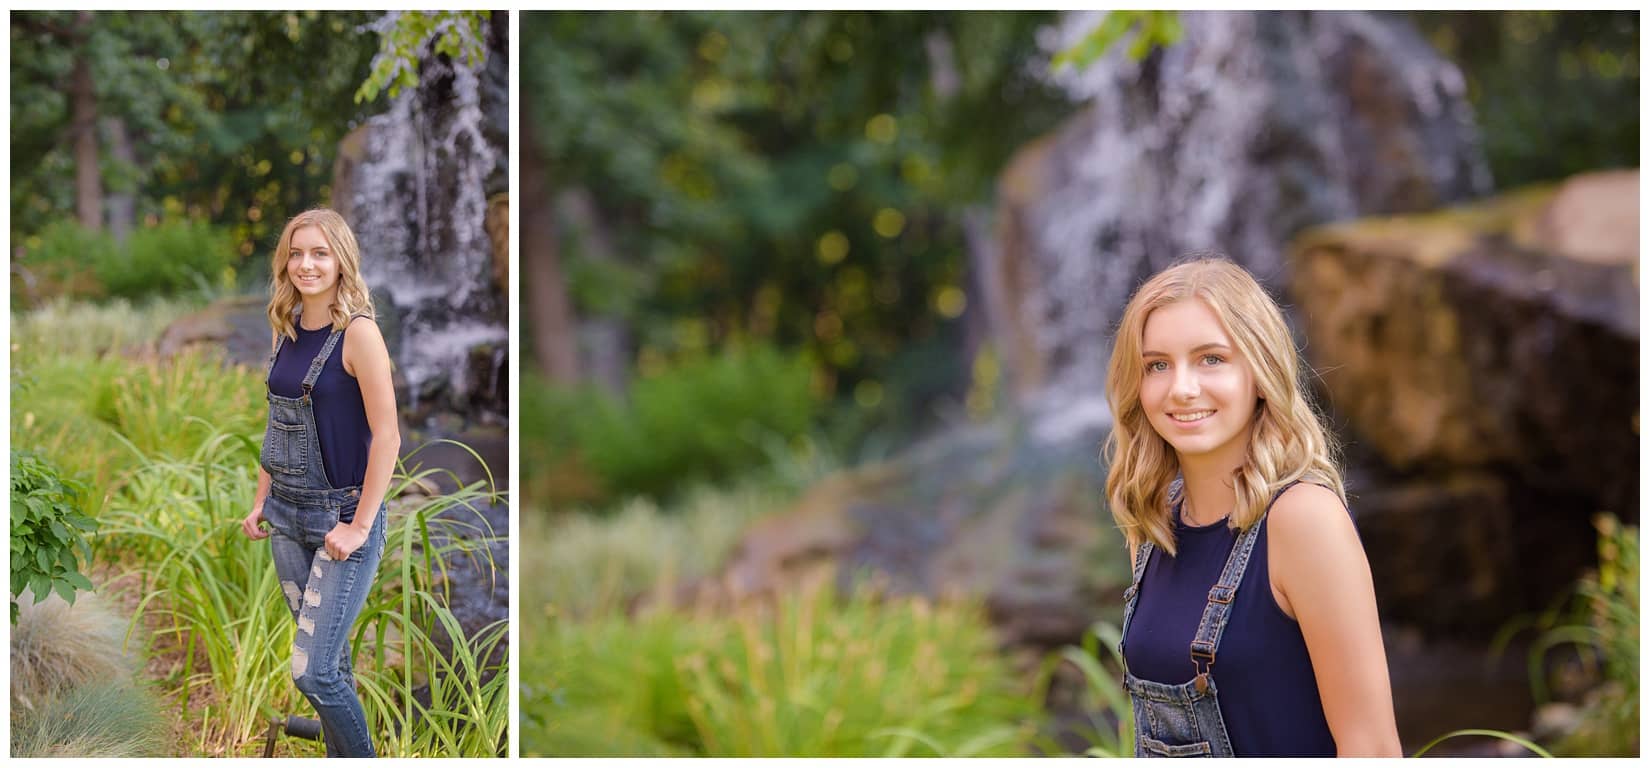 Teen girl poses for portrait. Photos by Tiffany Hix Photography.